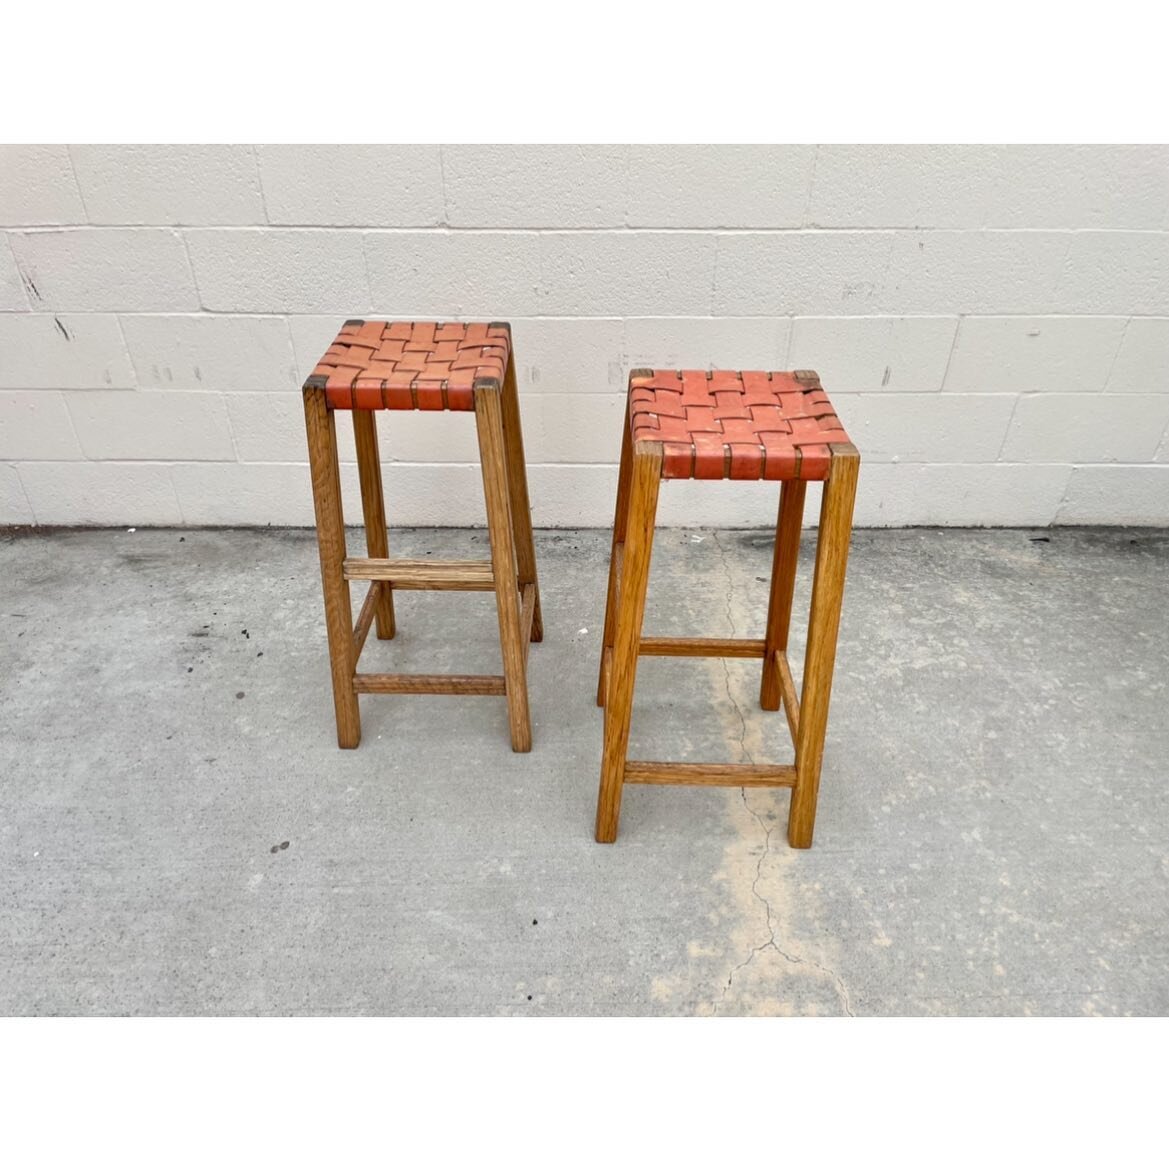 A pair of ranch 30&rdquo; oak bar stools with woven leather seats. 
Available @popuphome 
.
.
#ranchfurniture #rusticmodern #midcenturymodern #midcenturyfurniture #vintagehome #vitagehomegoods